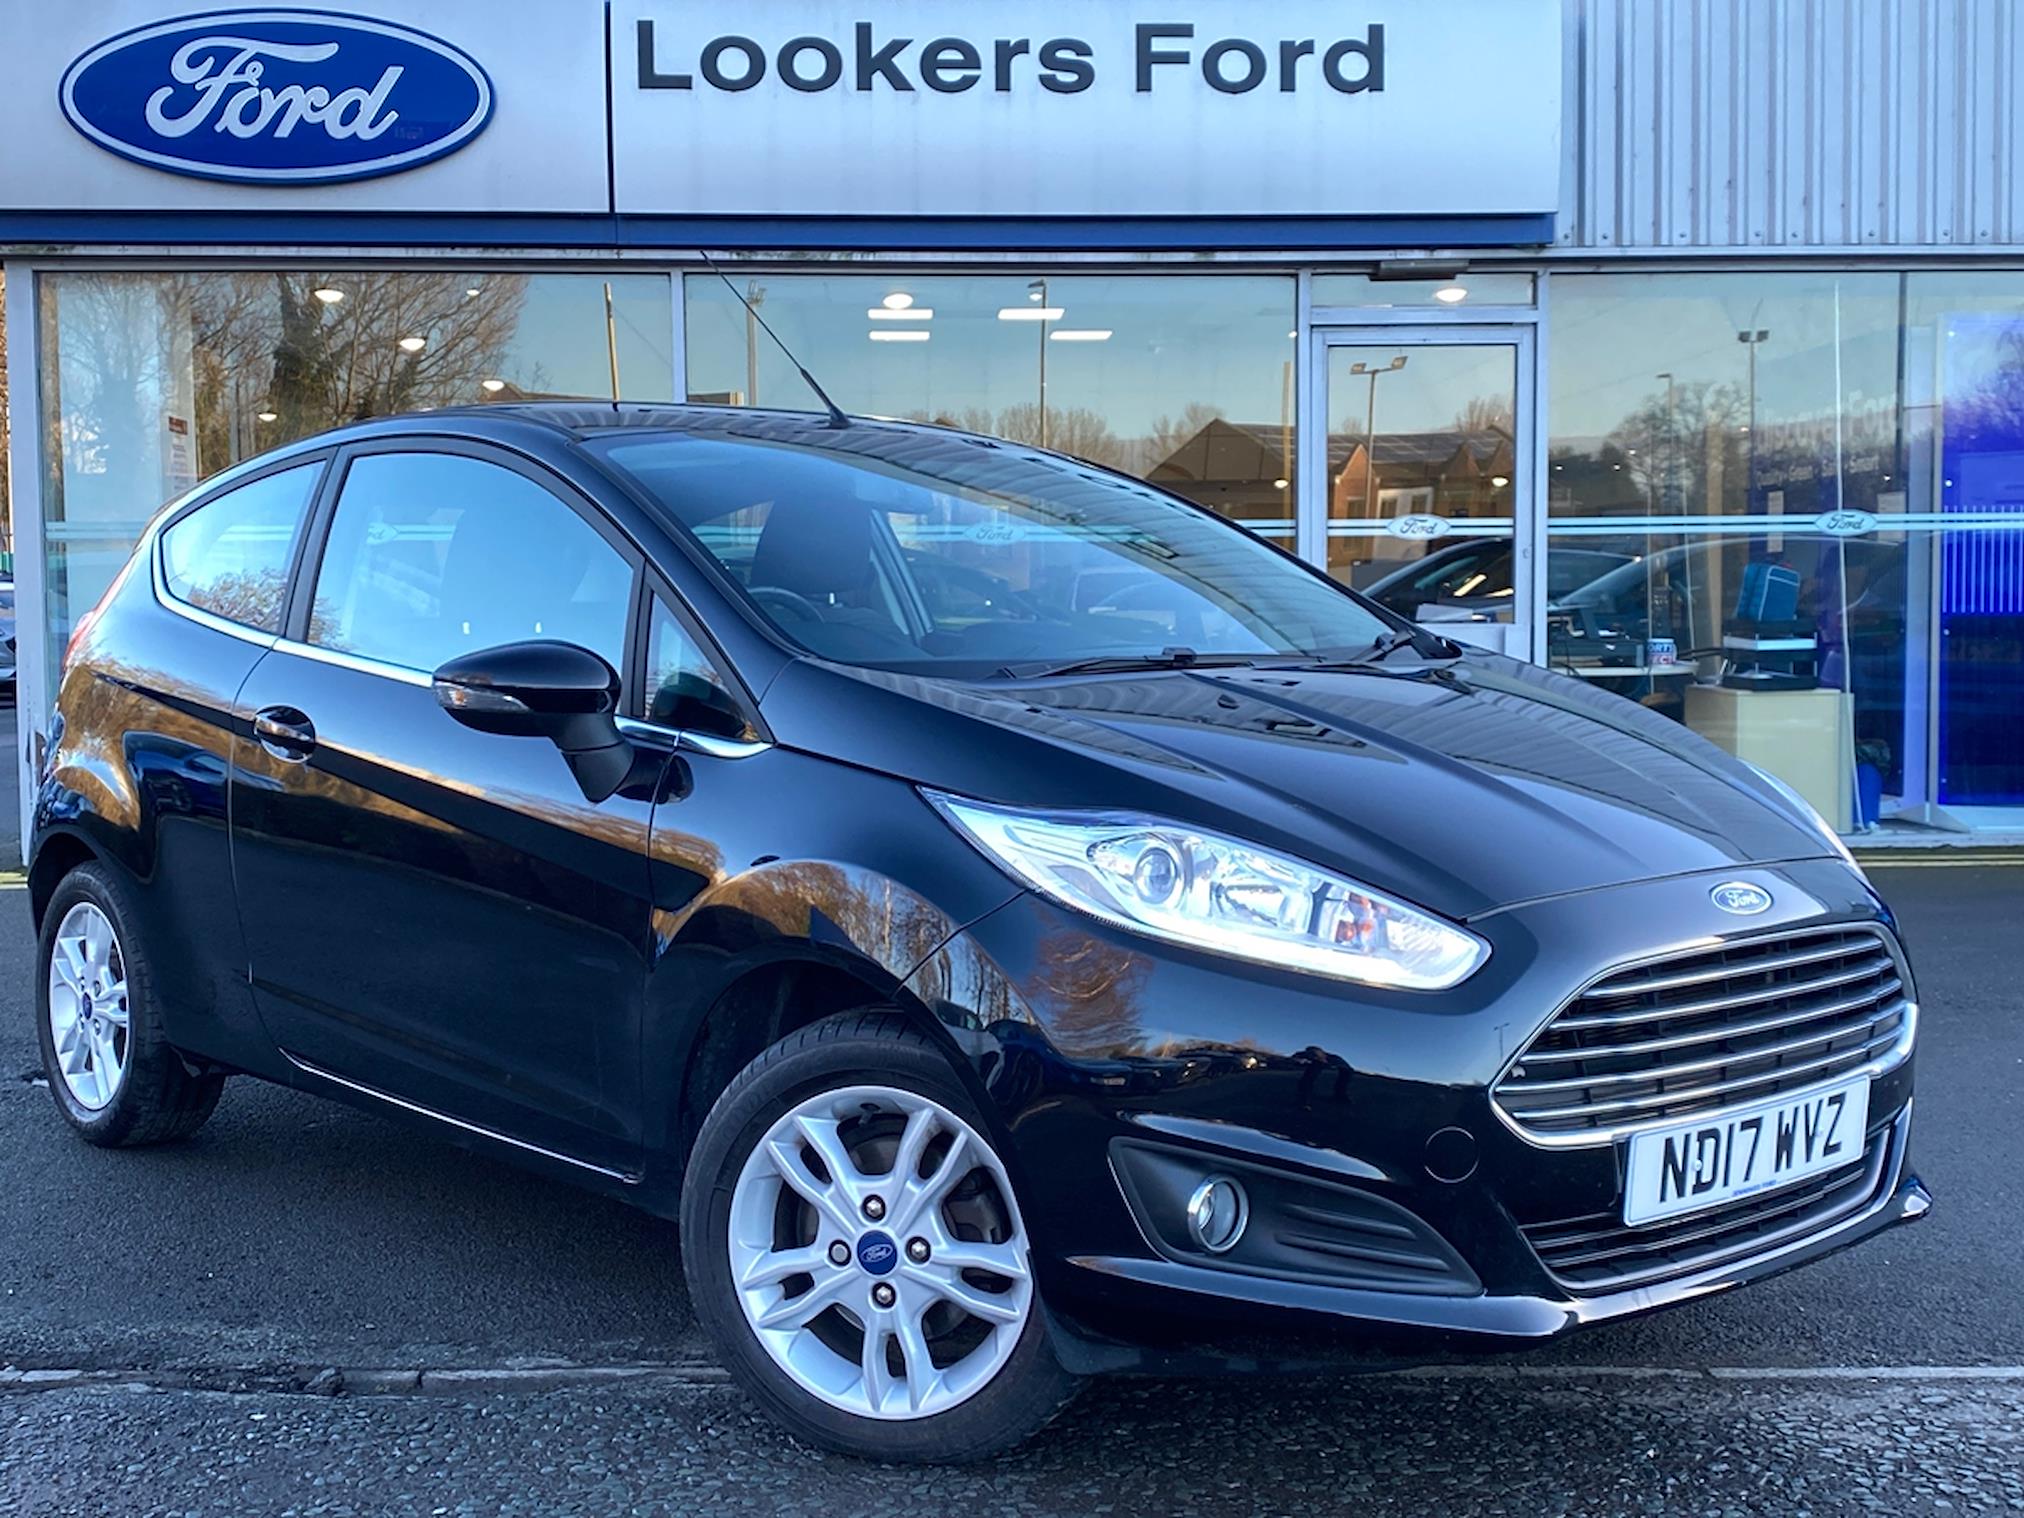 Used FORD FIESTA 1.25 82 Zetec 3Dr 2017 | Lookers